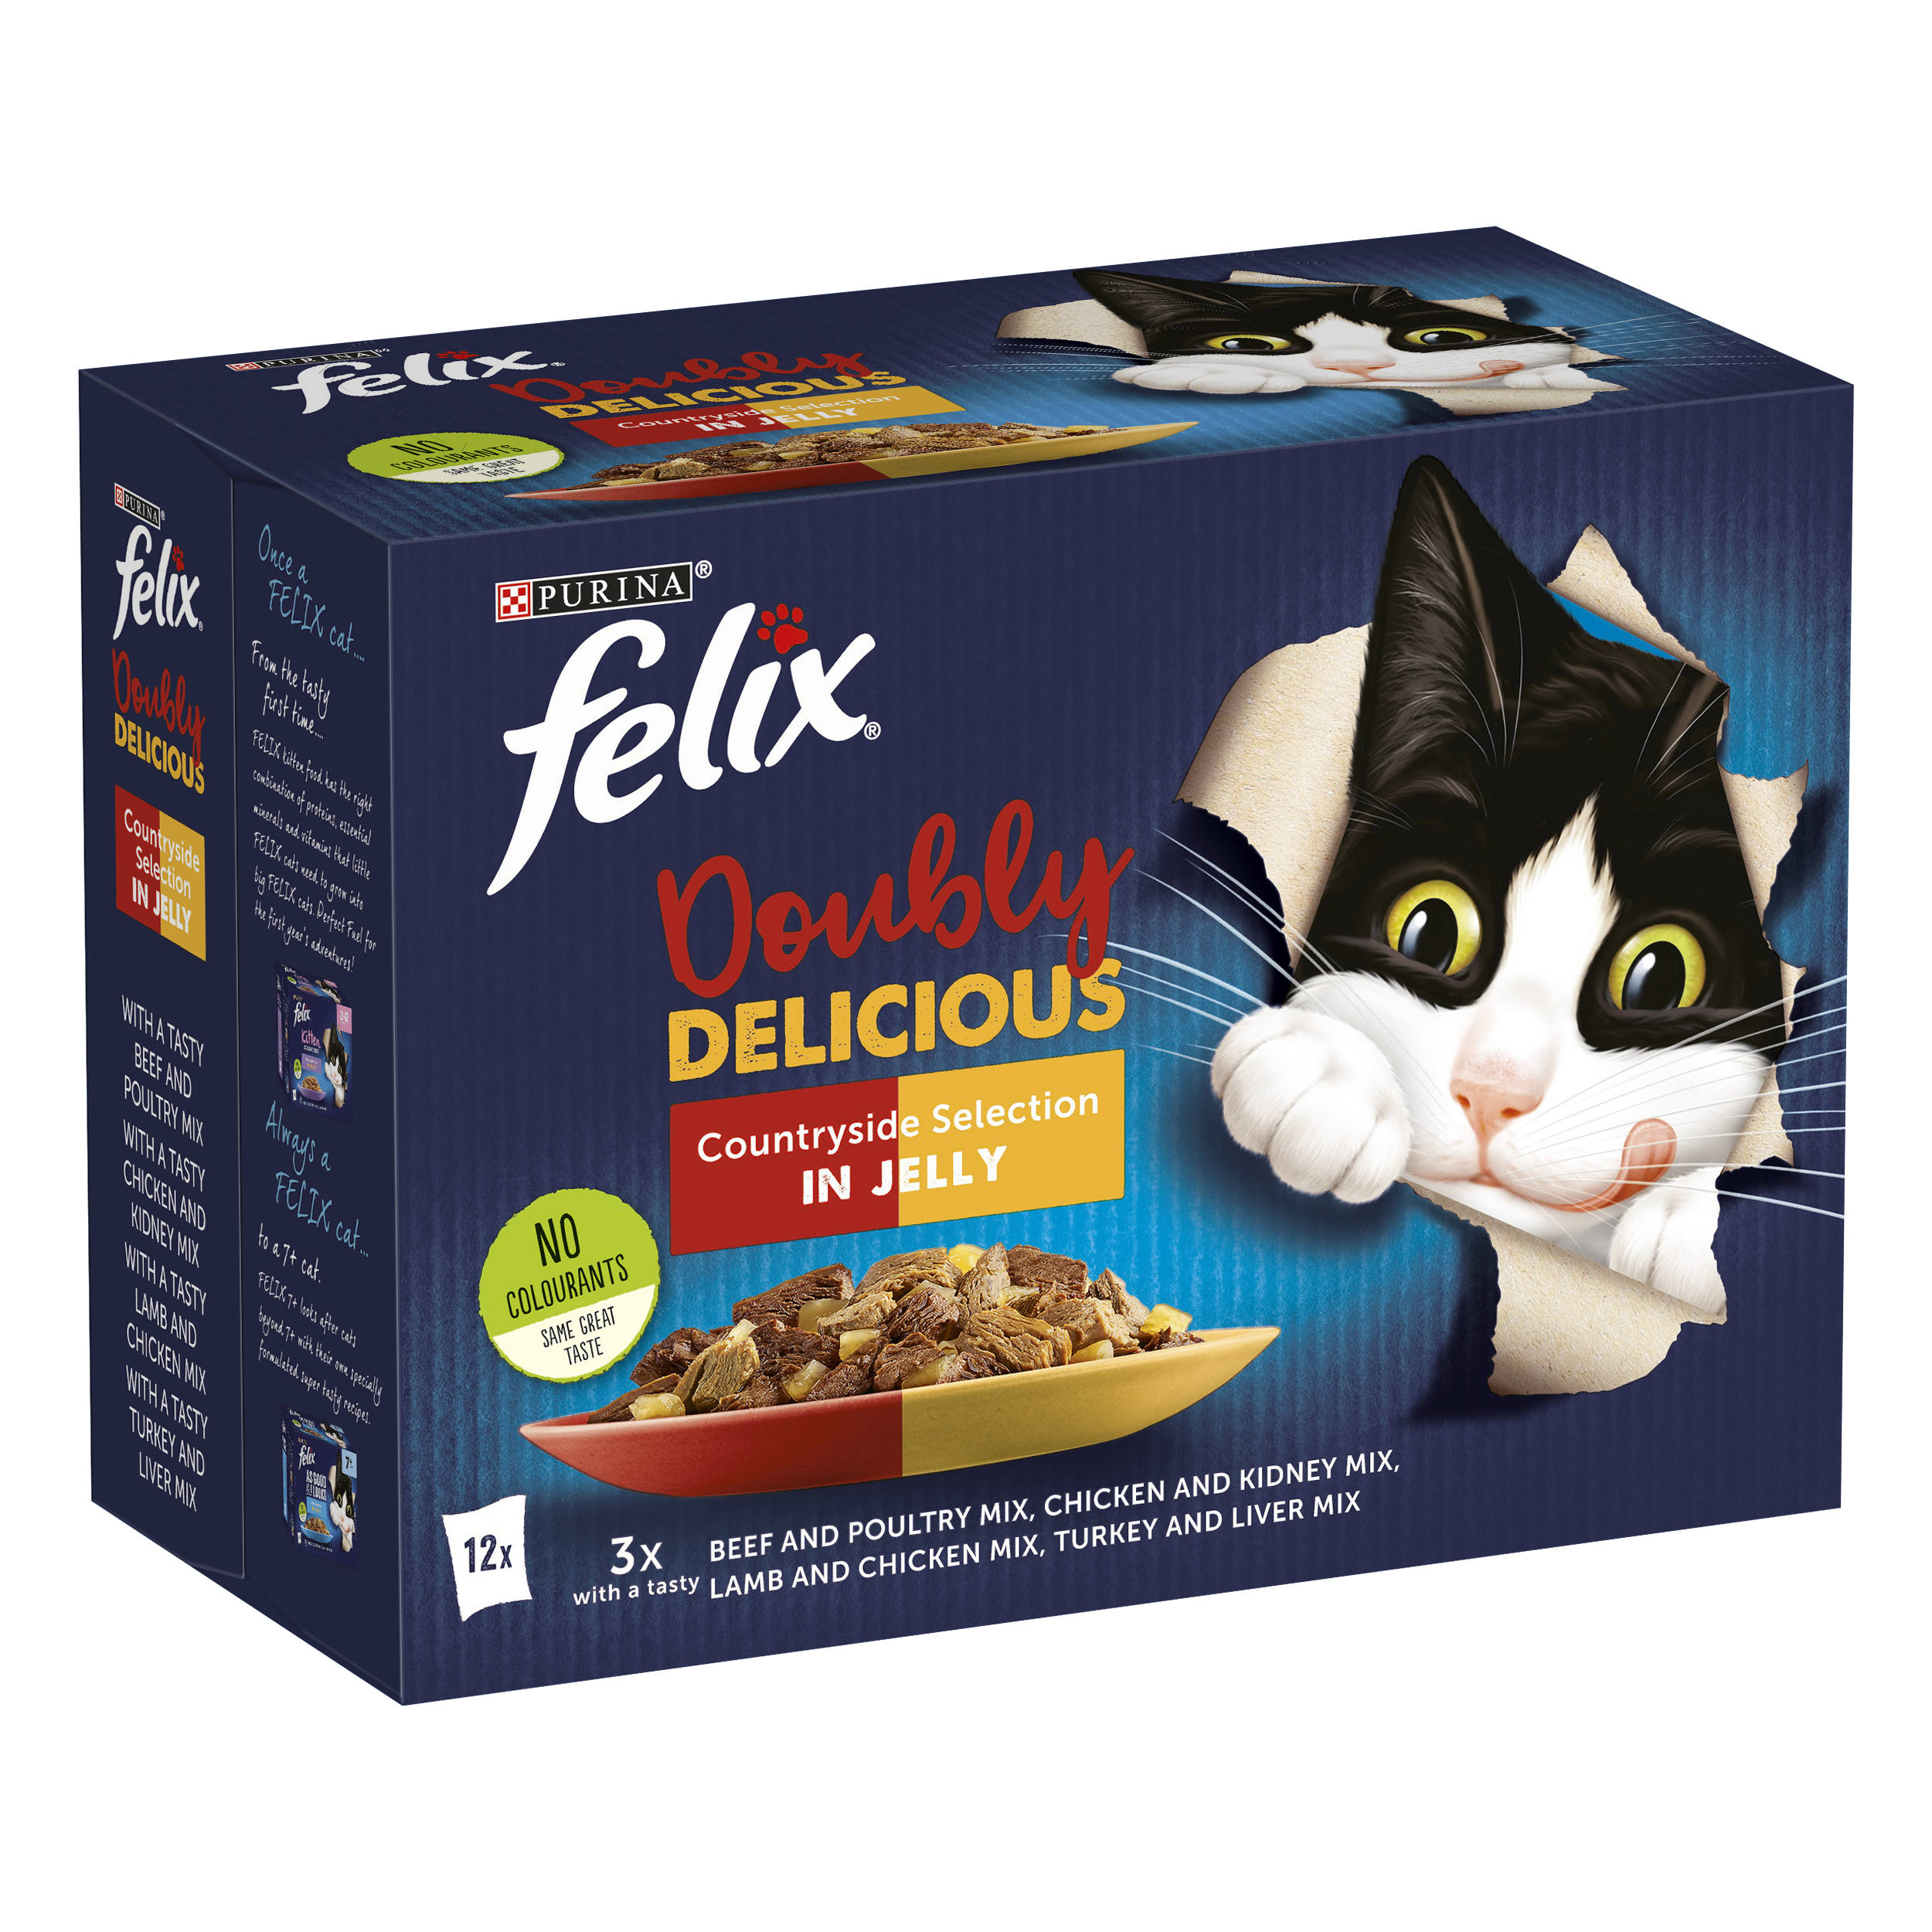 Purina Felix® As Good As It Looks Doubly Delicious Multipack Meat Selection in Jelly 100g, Pack of 12